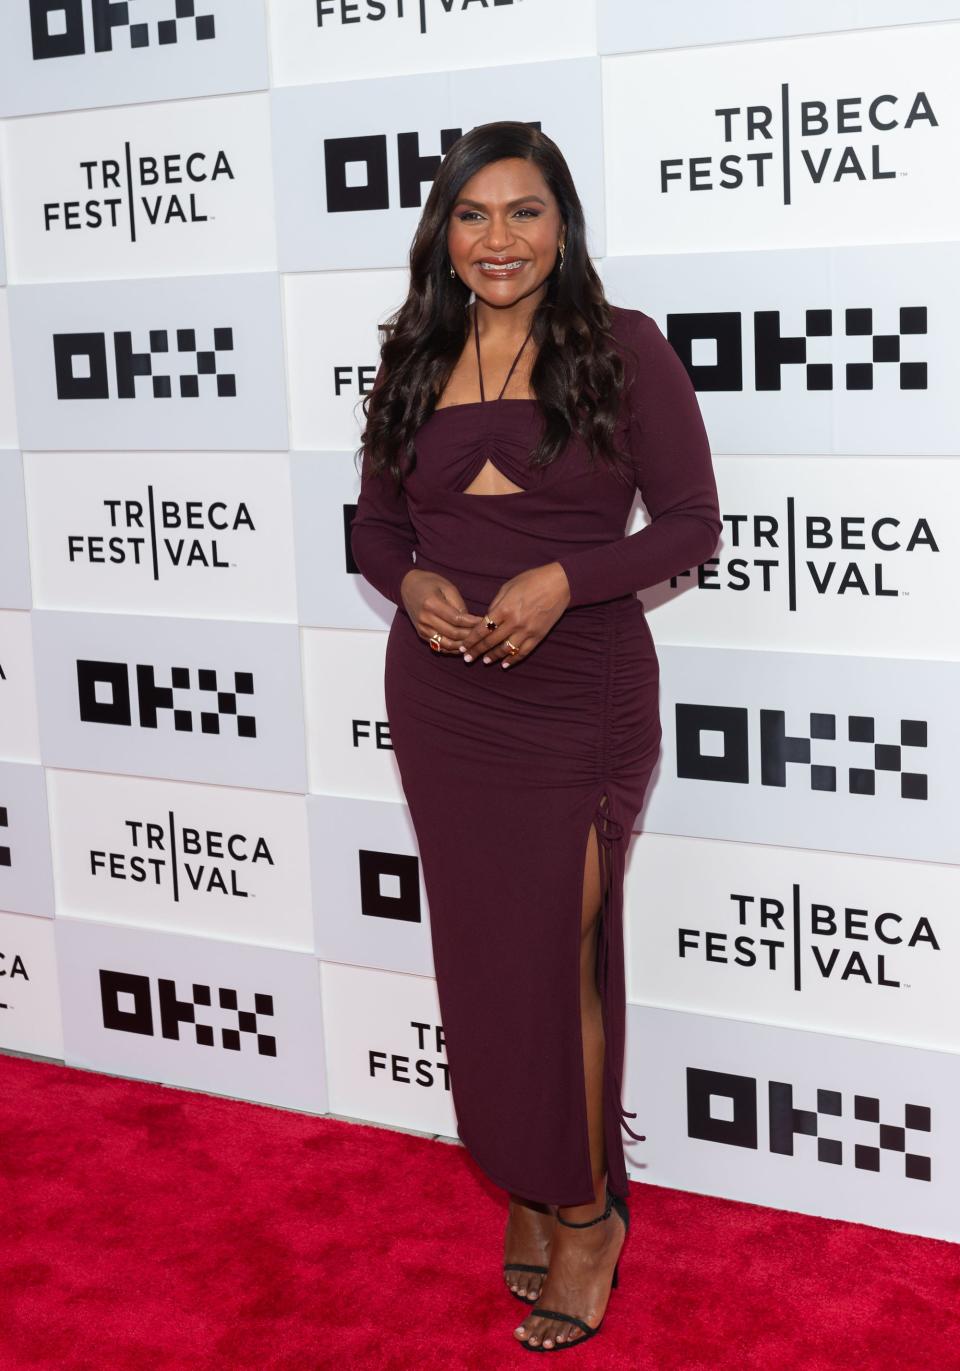 Mindy Kaling attends the 2022 Tribeca Festival.